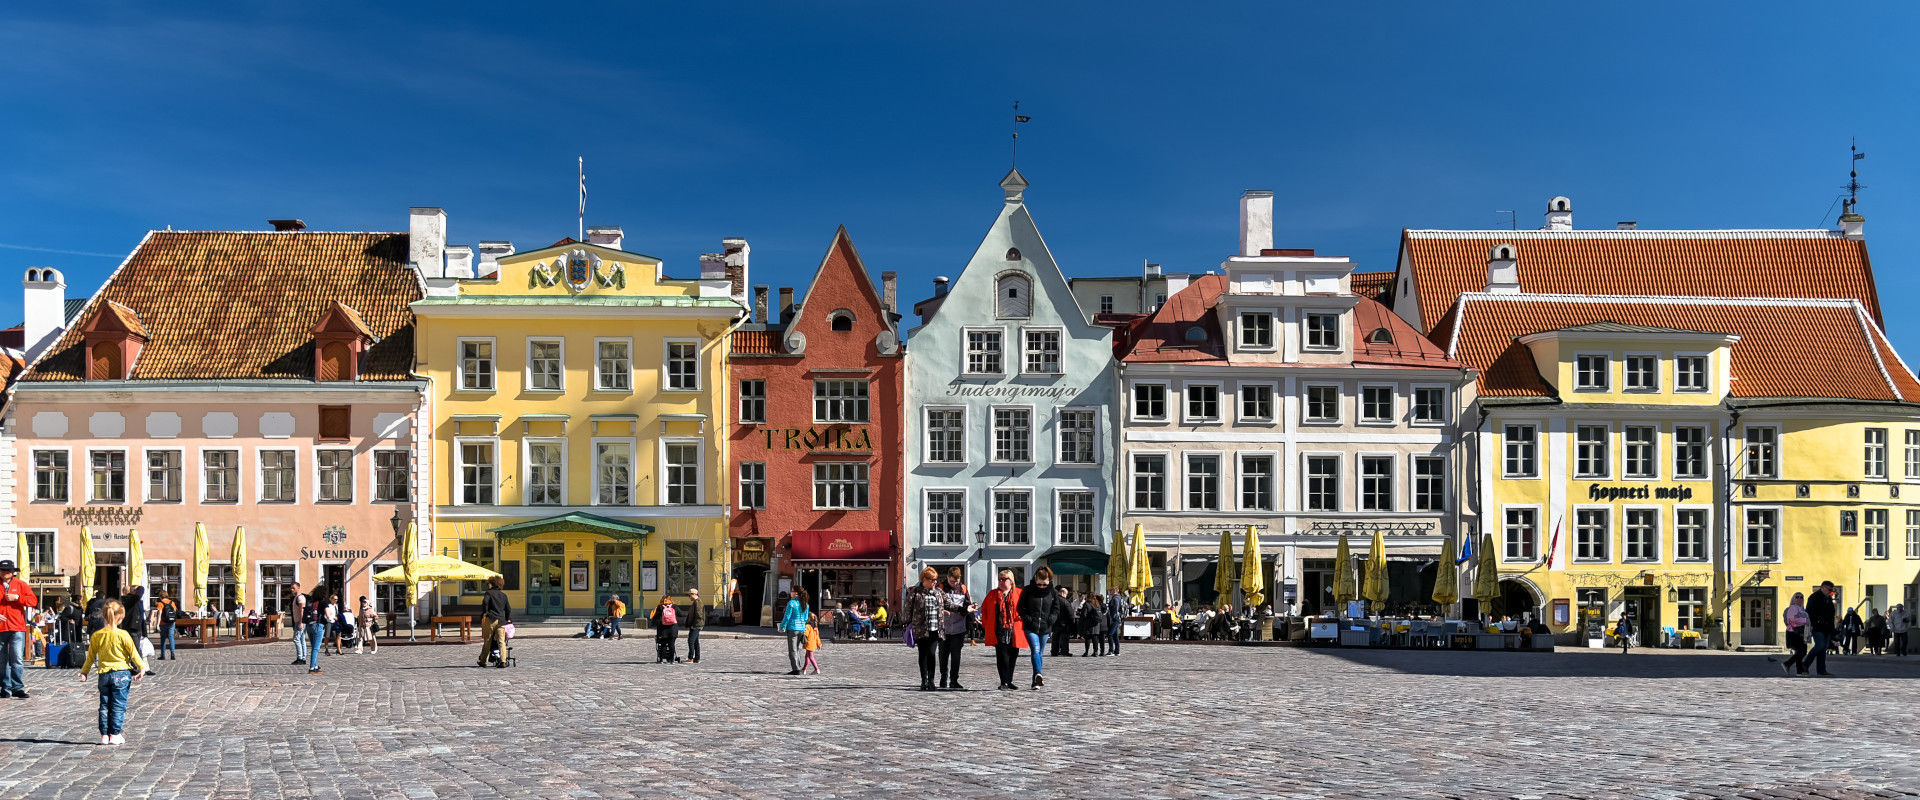 Why Choose Estonia for Your Study Abroad Experience